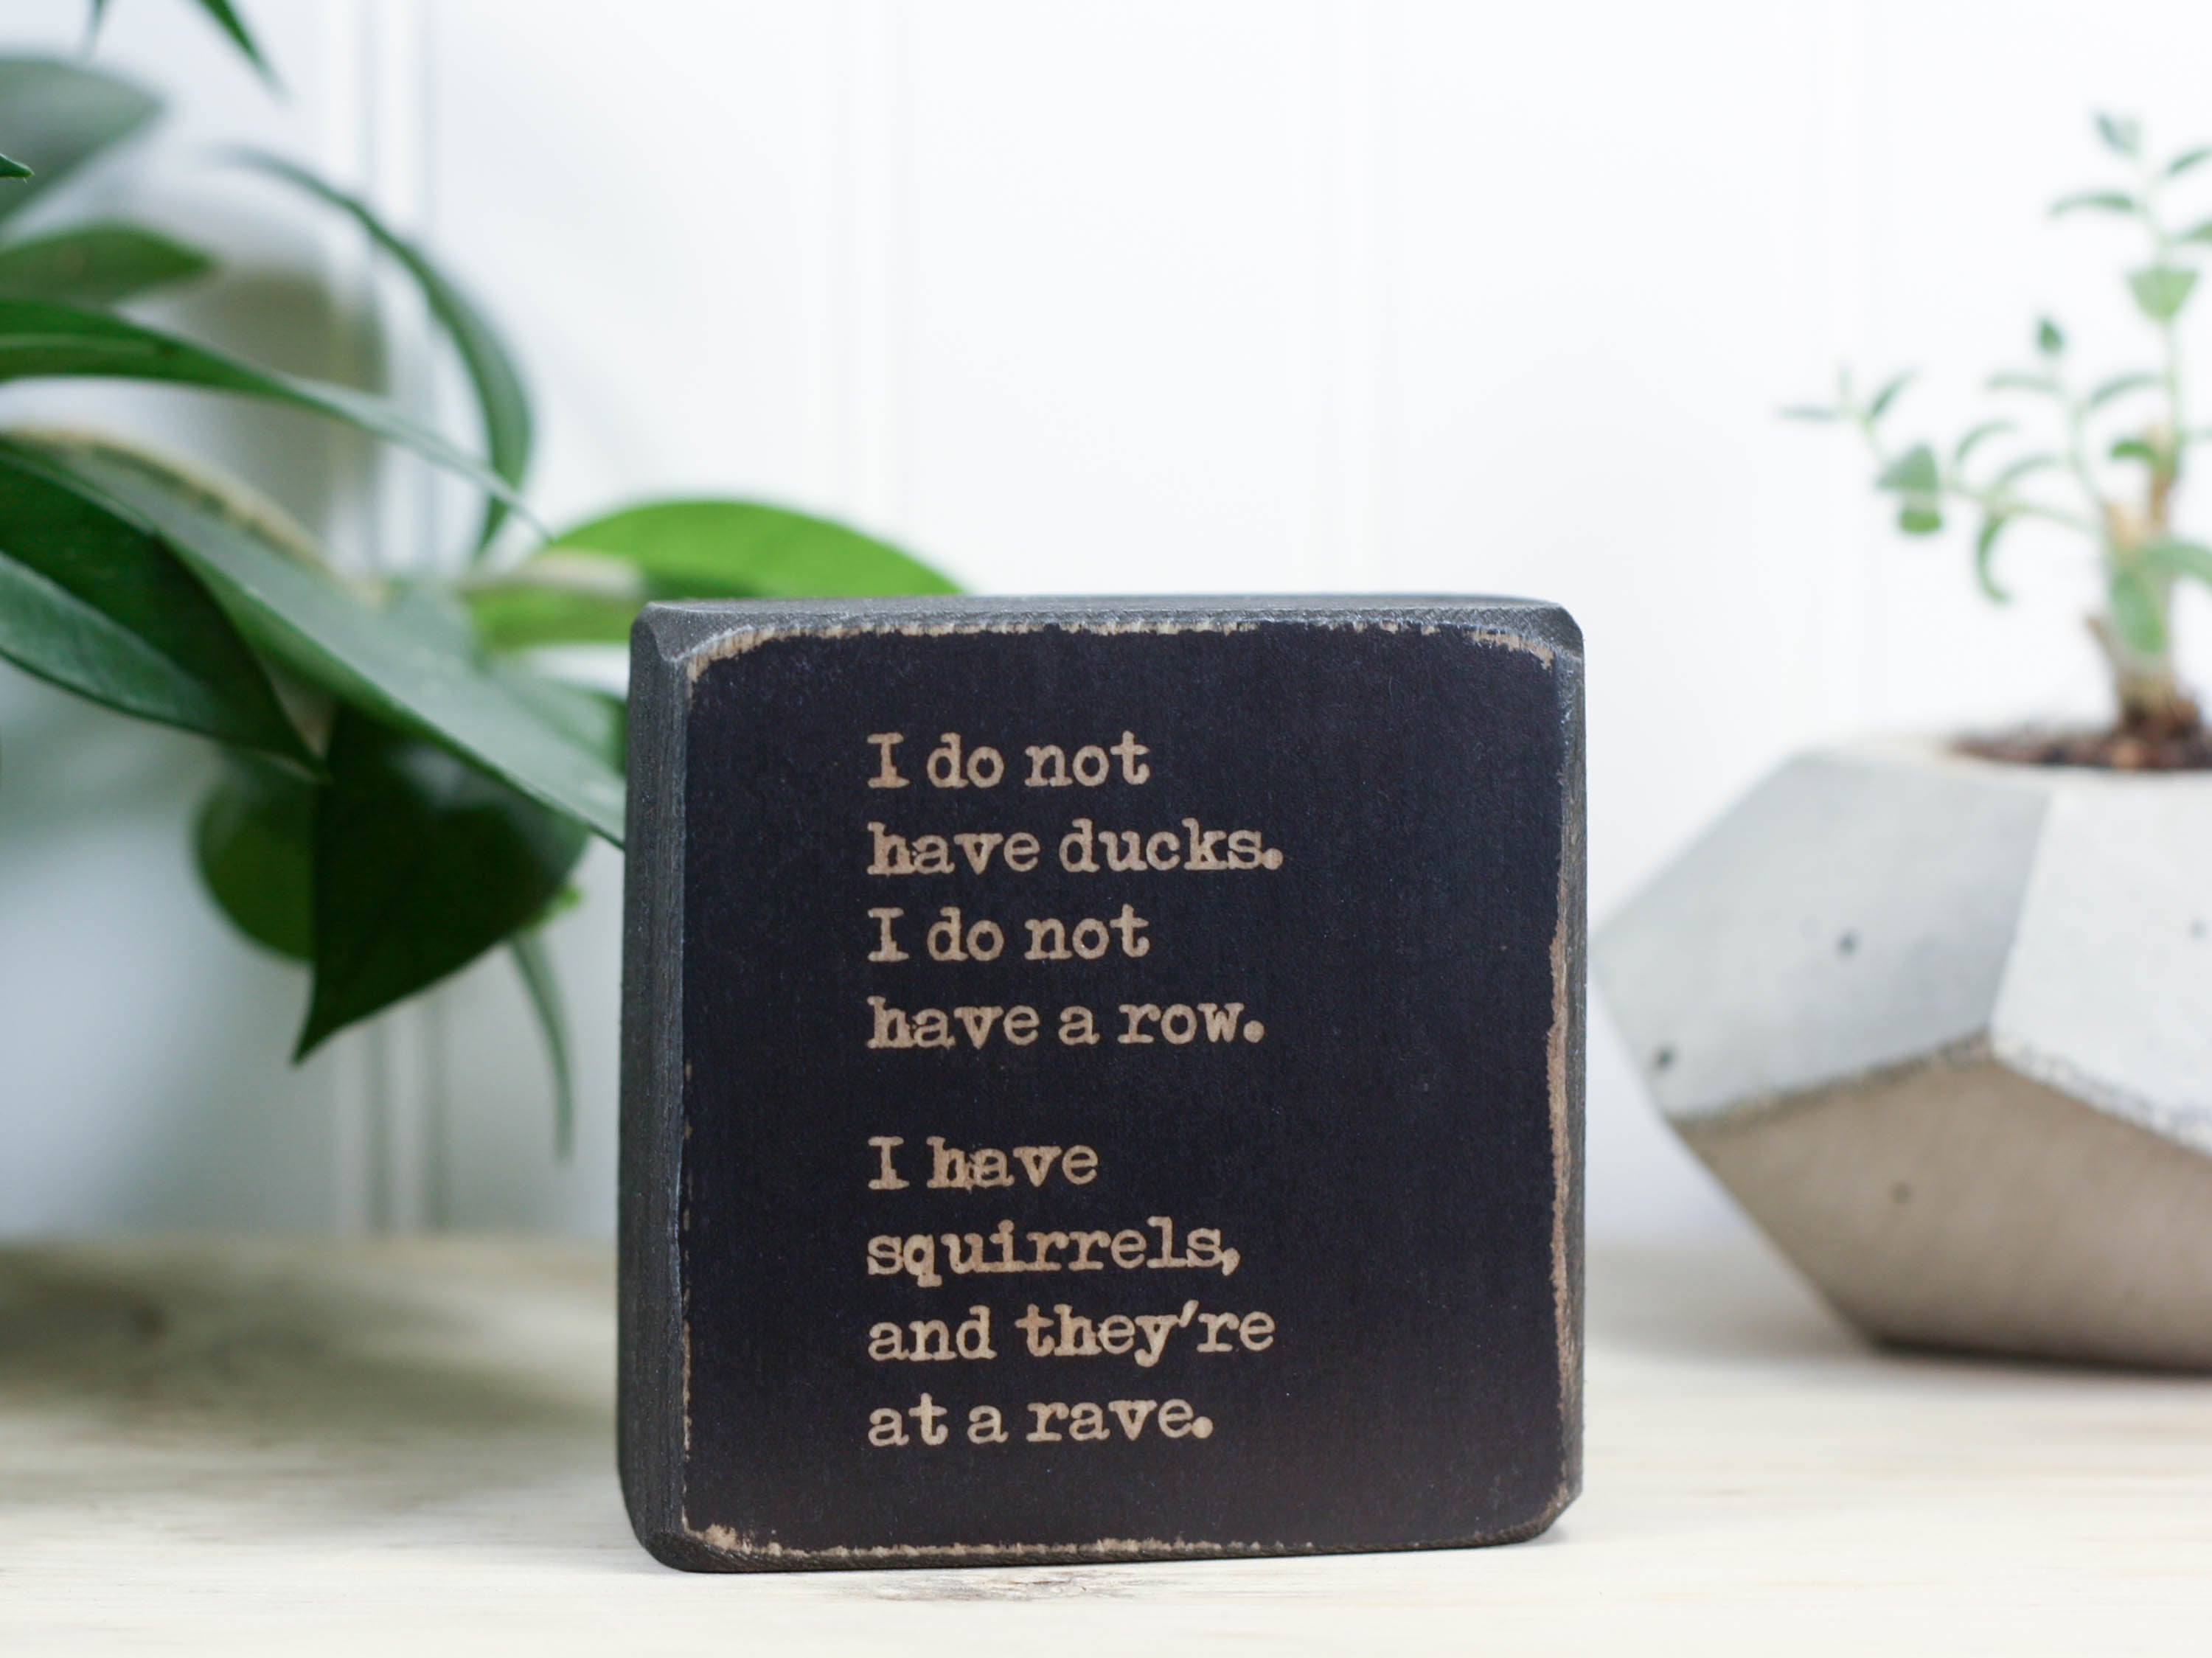 Small, freestanding, distressed black, solid wood sign with a funny saying on it "I do not have ducks. I do not have a row. I have squirrels, and they're at a rave."